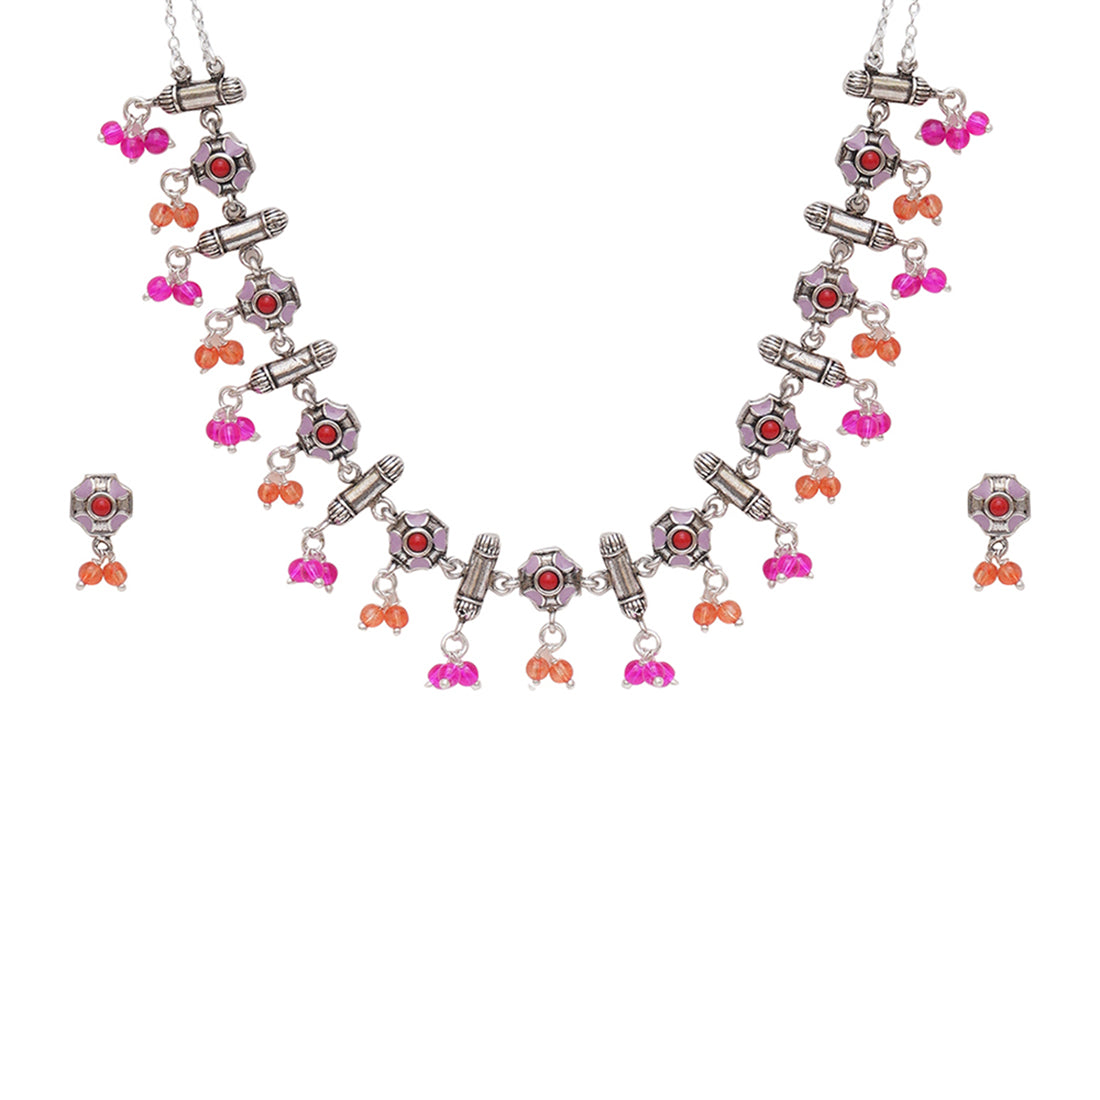 Festive Hues Intricate Enameled Choker Necklace Set with Artisanal Motifs and Pink Beads